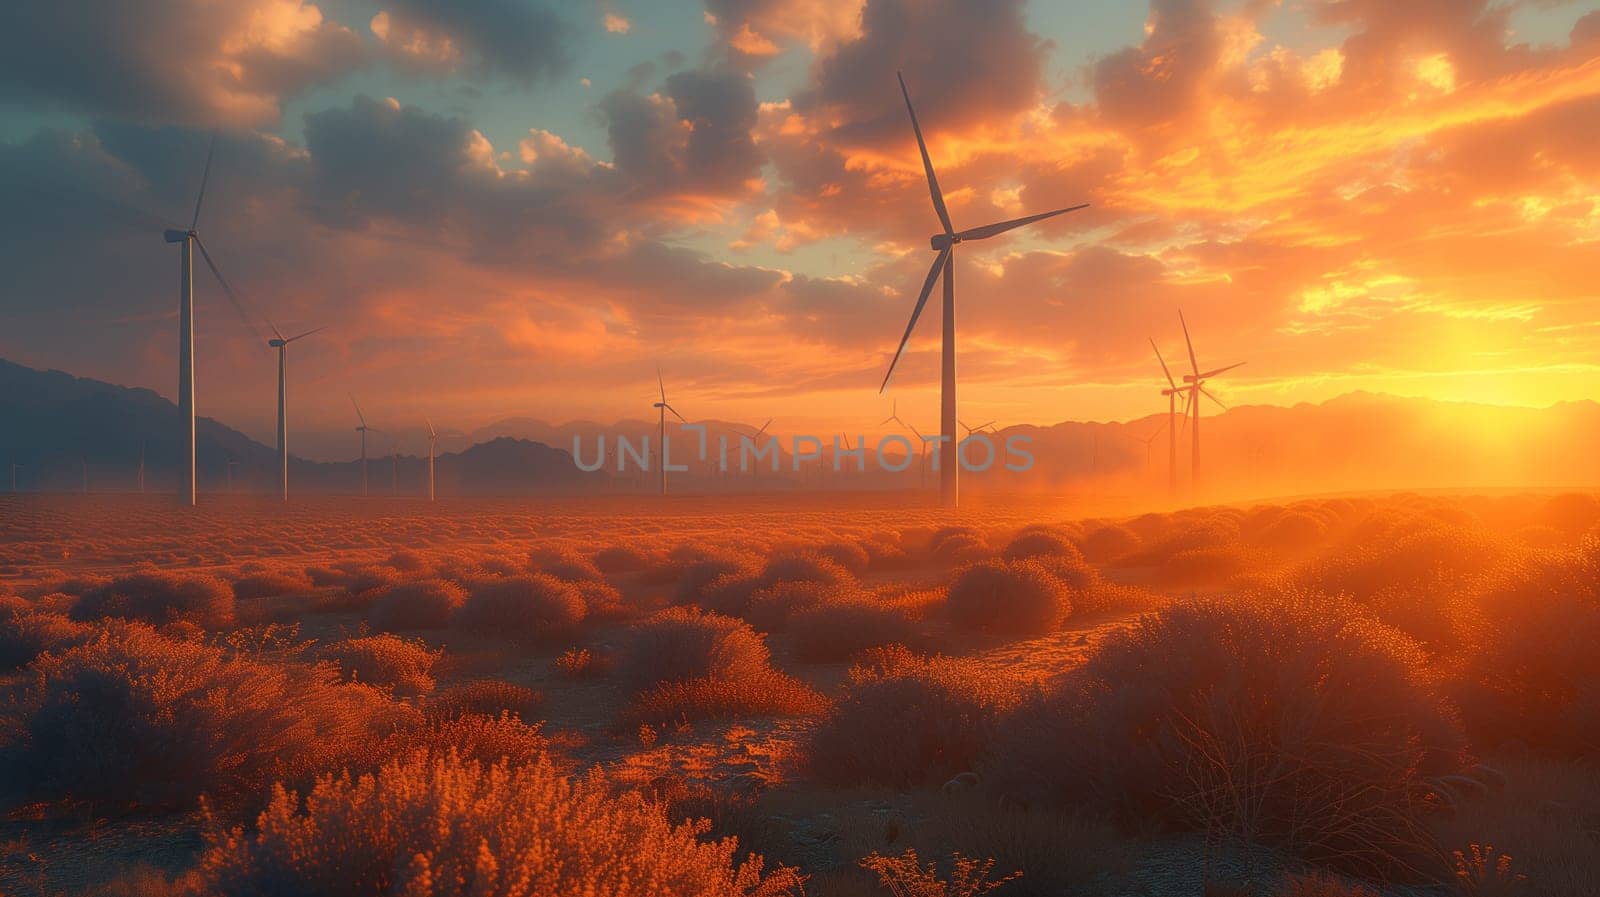 A breathtaking natural landscape at dusk, with wind turbines in the foreground, mountains in the background, and a red sky at morning afterglow